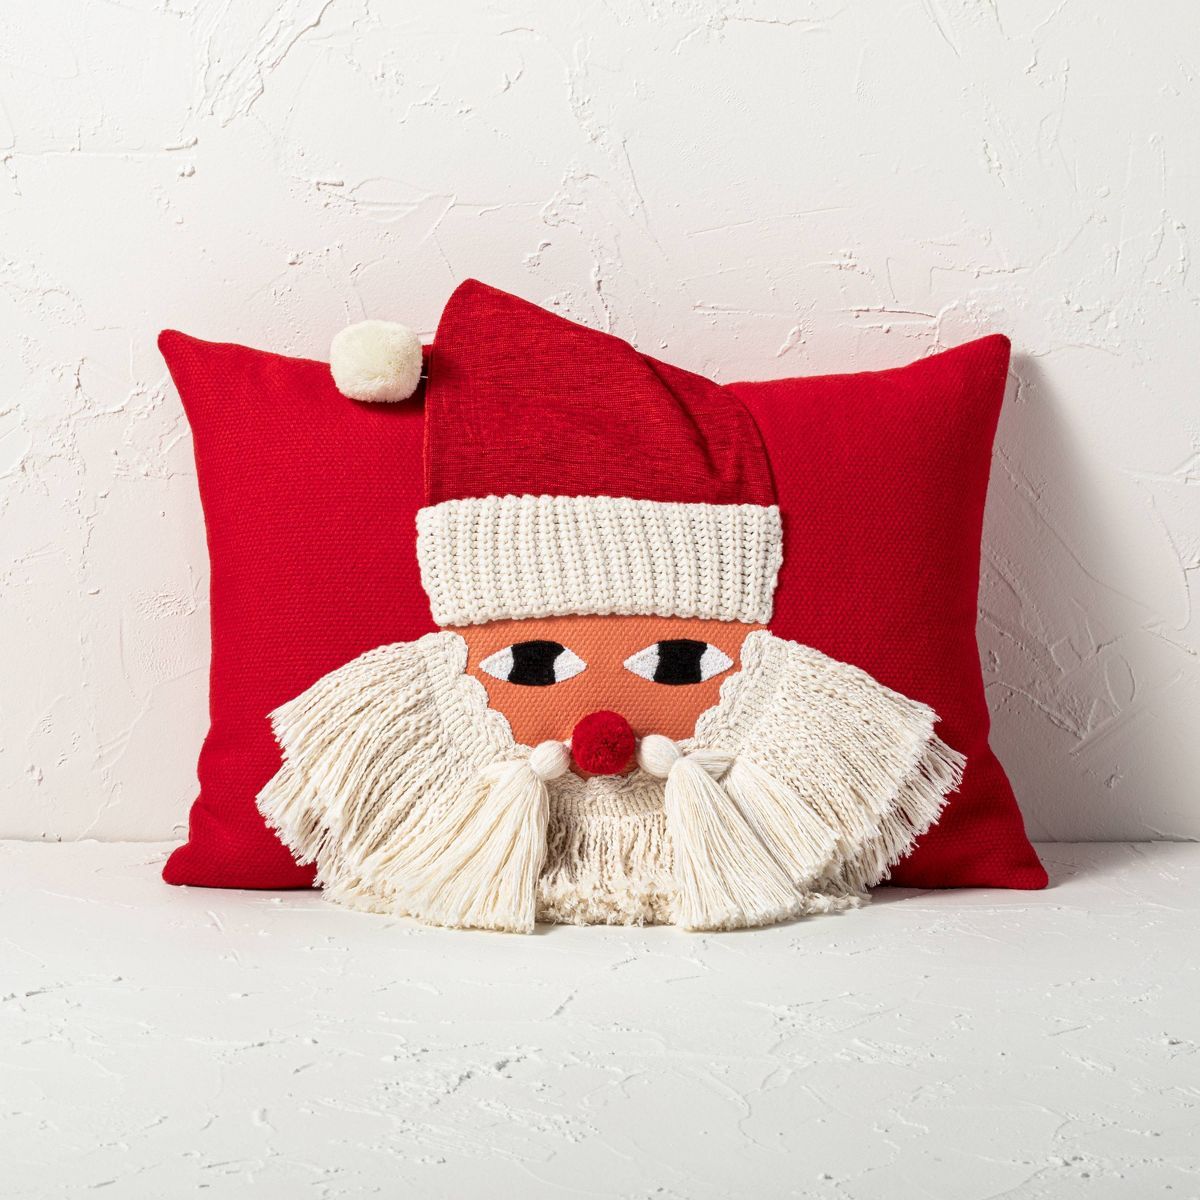 14"x20" Cotton Embroidered Santa with Knit Cap Oblong Decorative Pillow Red - Opalhouse™ design... | Target